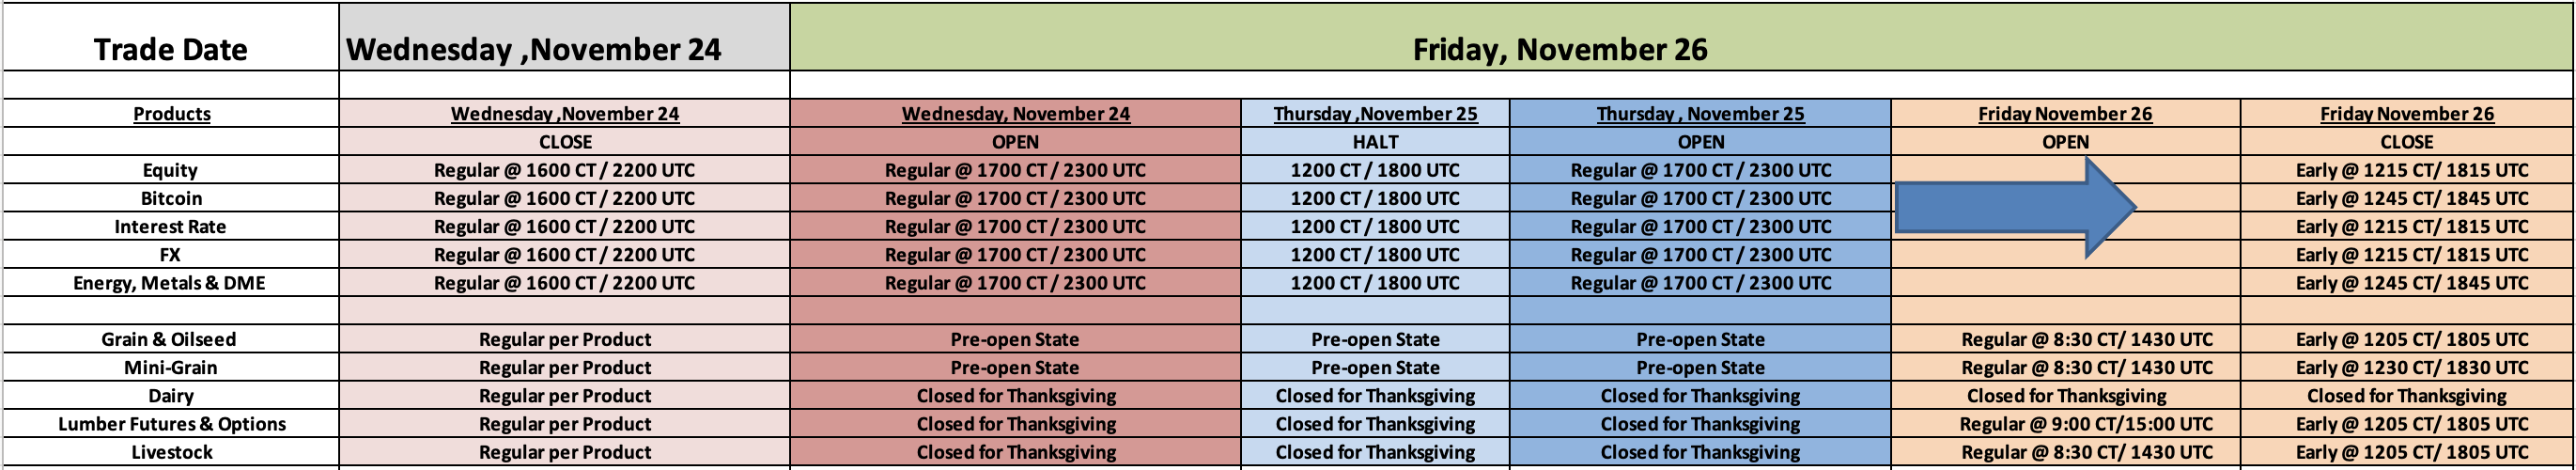 Thanksgiving US Holiday Trading Schedule 2021